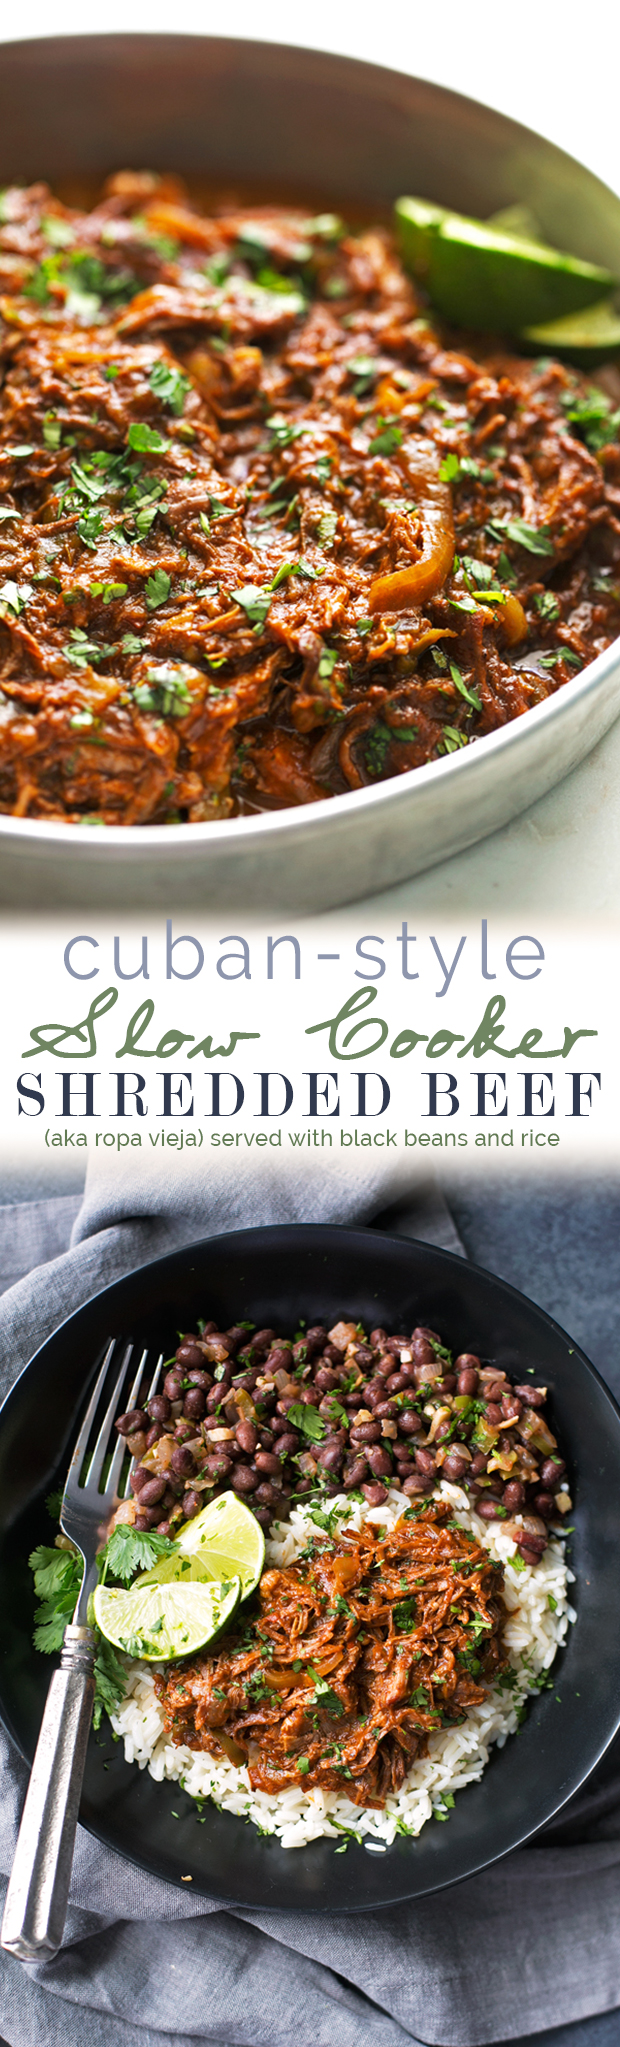 Cuban Shredded Beef (Slow Cooker) - The easiest recipe for ropa vieja! Made in the slow cooker. Just add everything in and out comes the most tender, shredded beef EVER! #cubanshreddedbeef #shreddedbeeftacos #ropavieja #slowcooker | Littlespicejar.com